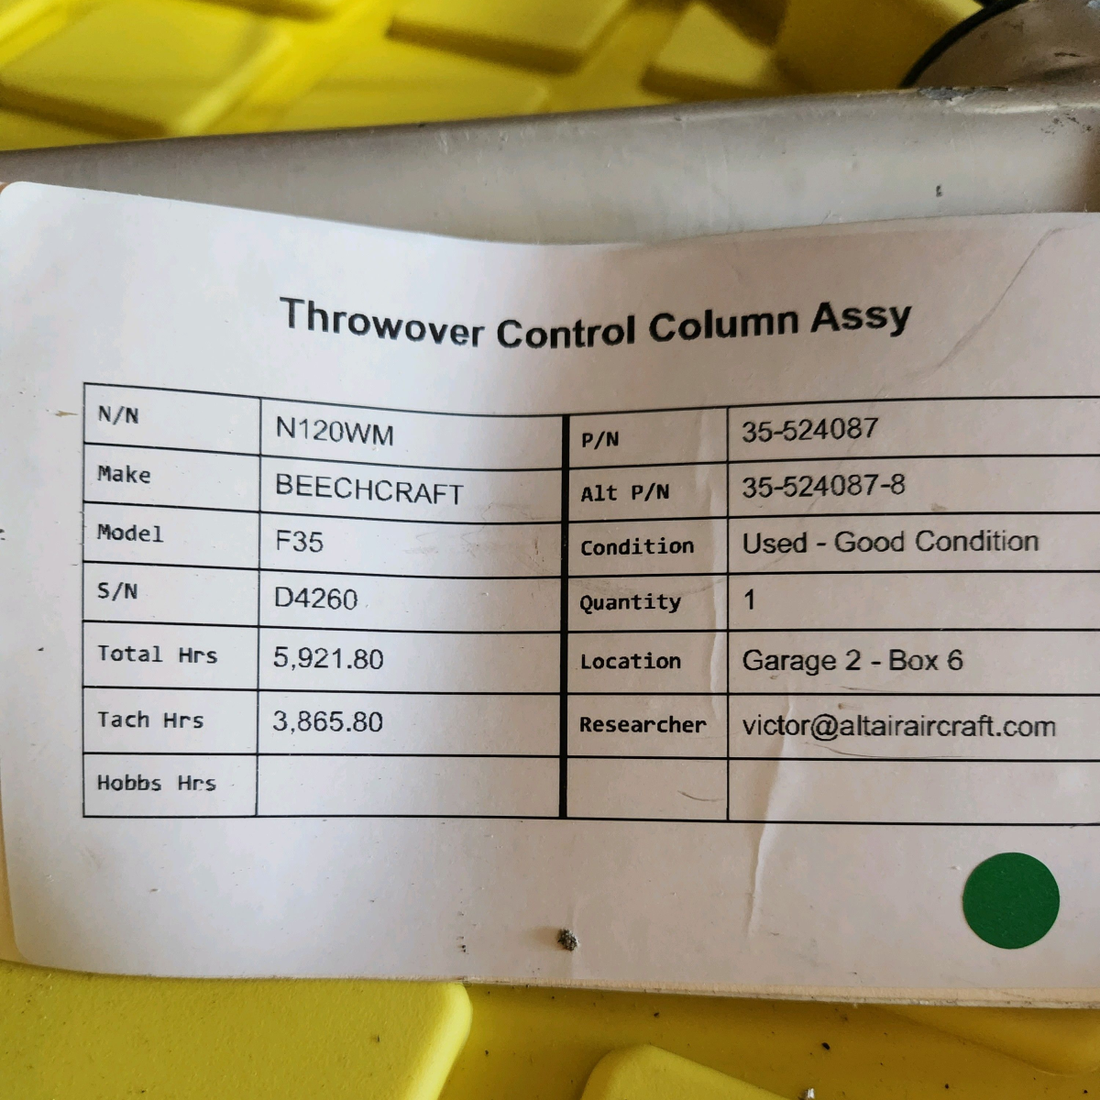 Used aircraft parts for sale, 35-524087 BEECHCRAFT F35 THROWOVER CONTROL COLUMN ASSY